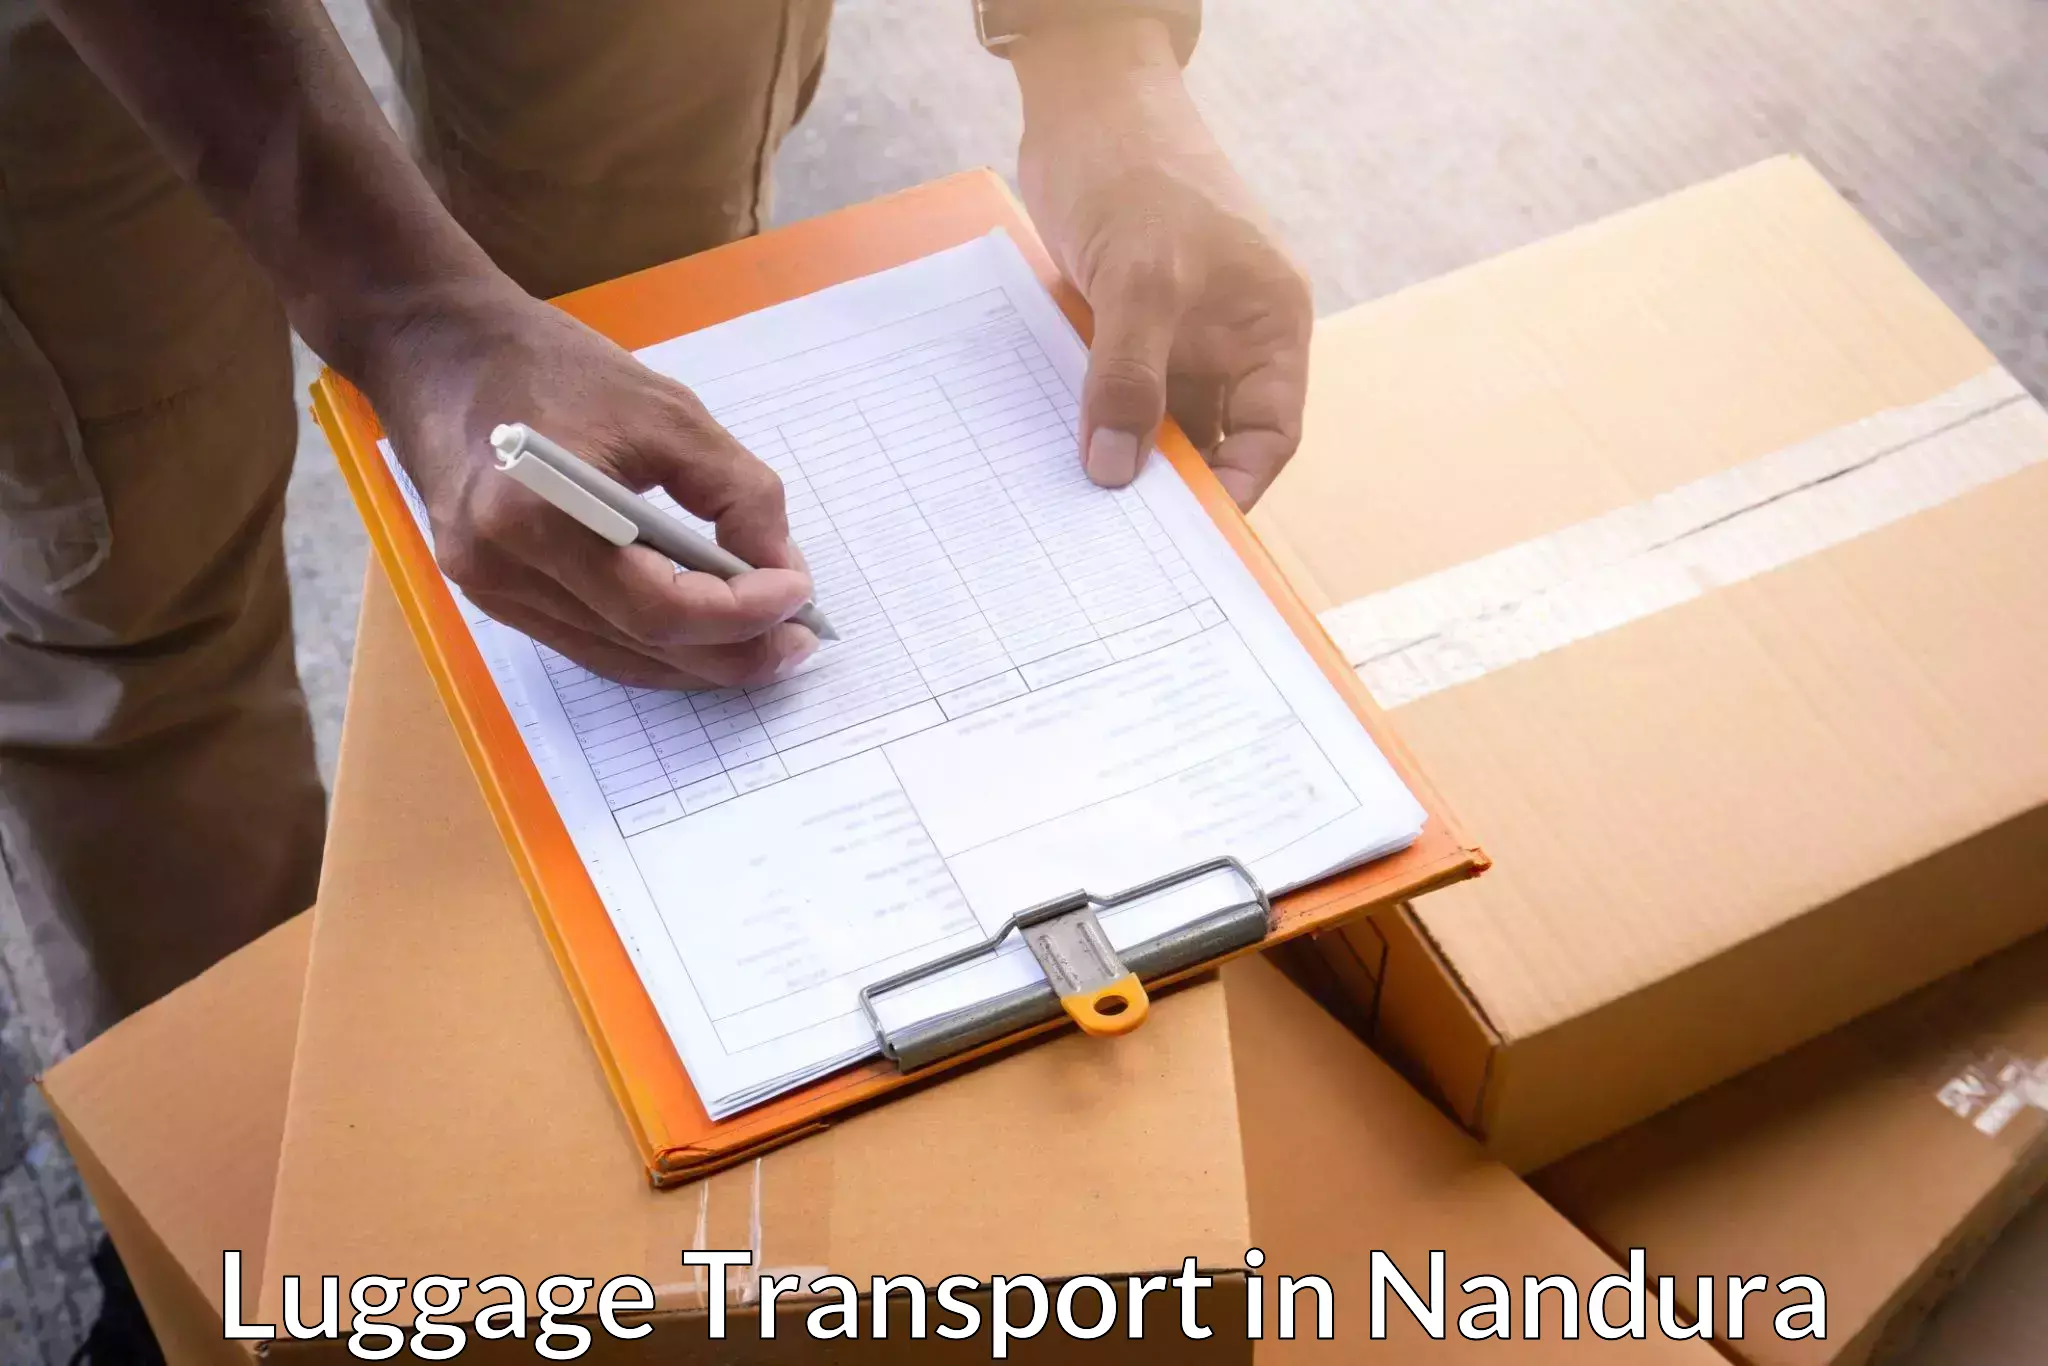 Baggage delivery management in Nandura